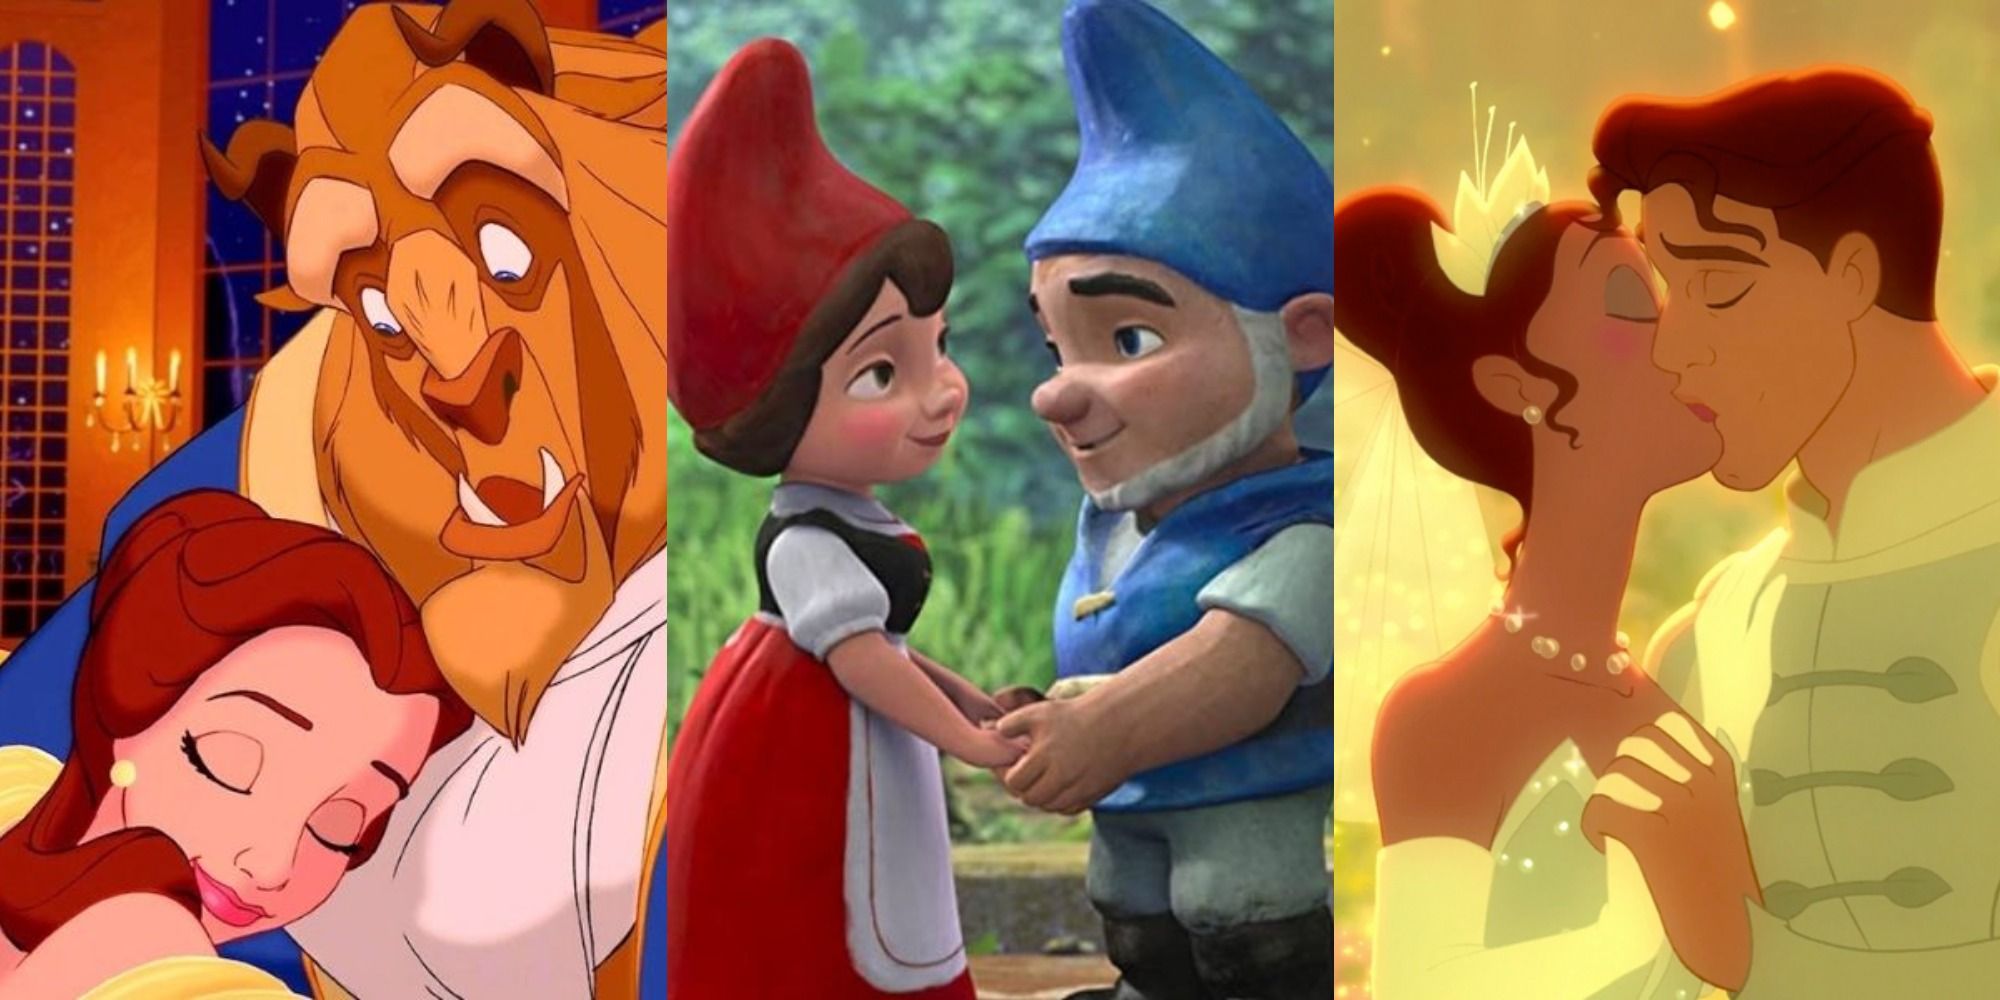 Split image of characters from Beauty and the Beast, Gnomeo and Juliet and The princess and the Frog embracing